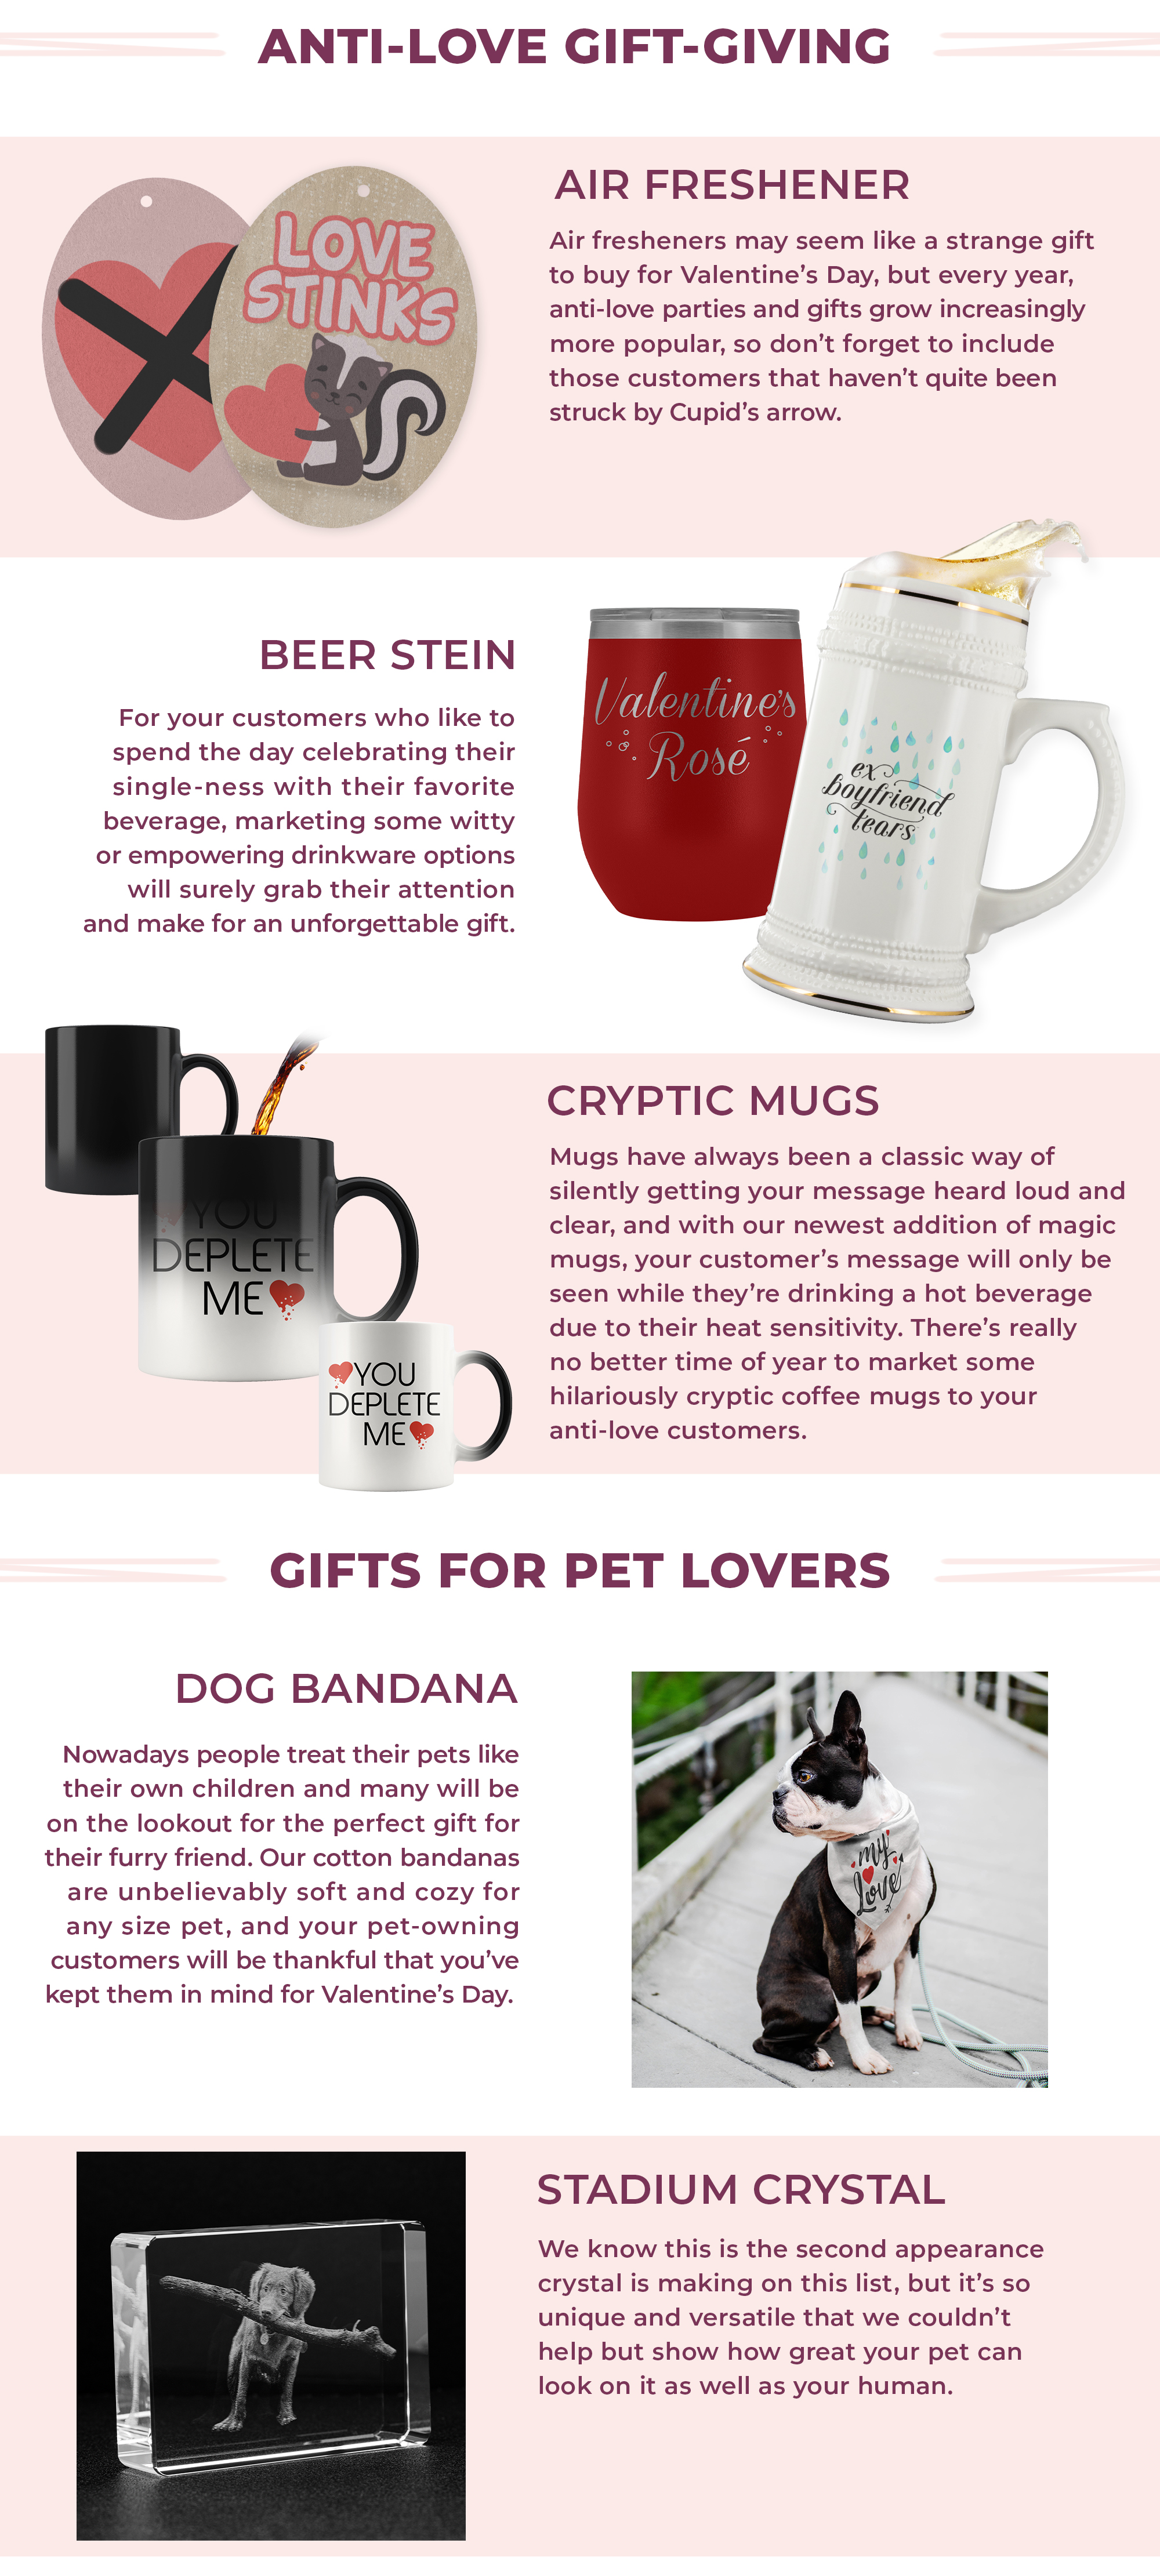 Share The Love This Year With Our Top Selling Valentine's Day Products